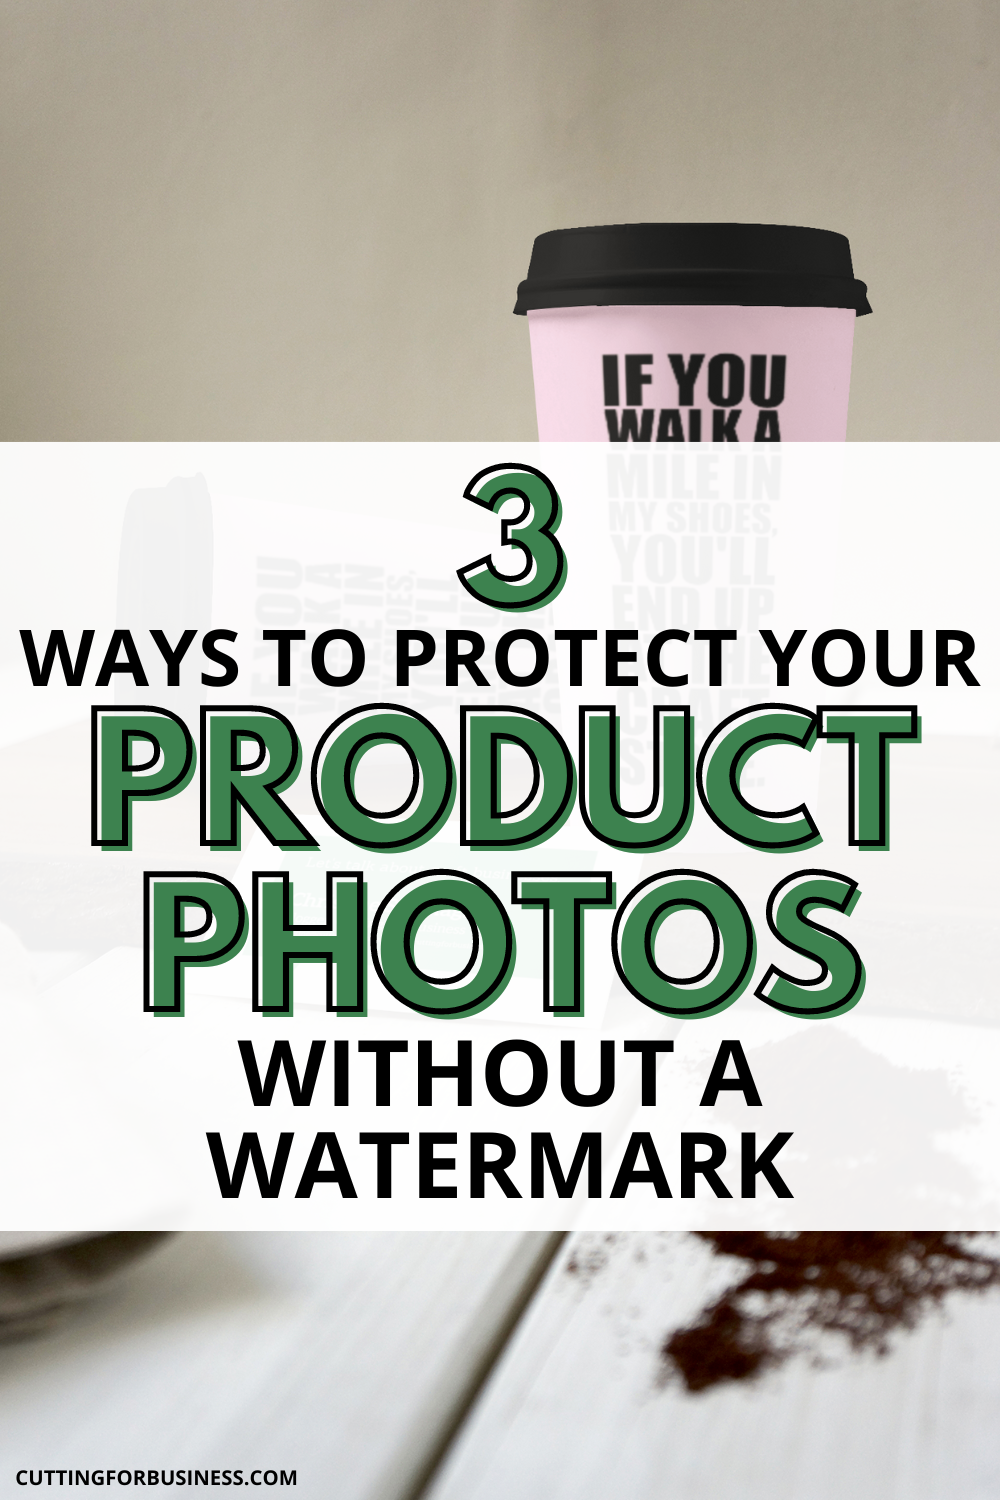 3 Ways to Protect Your Product Photos without a Watermark - cuttingforbusiness.com